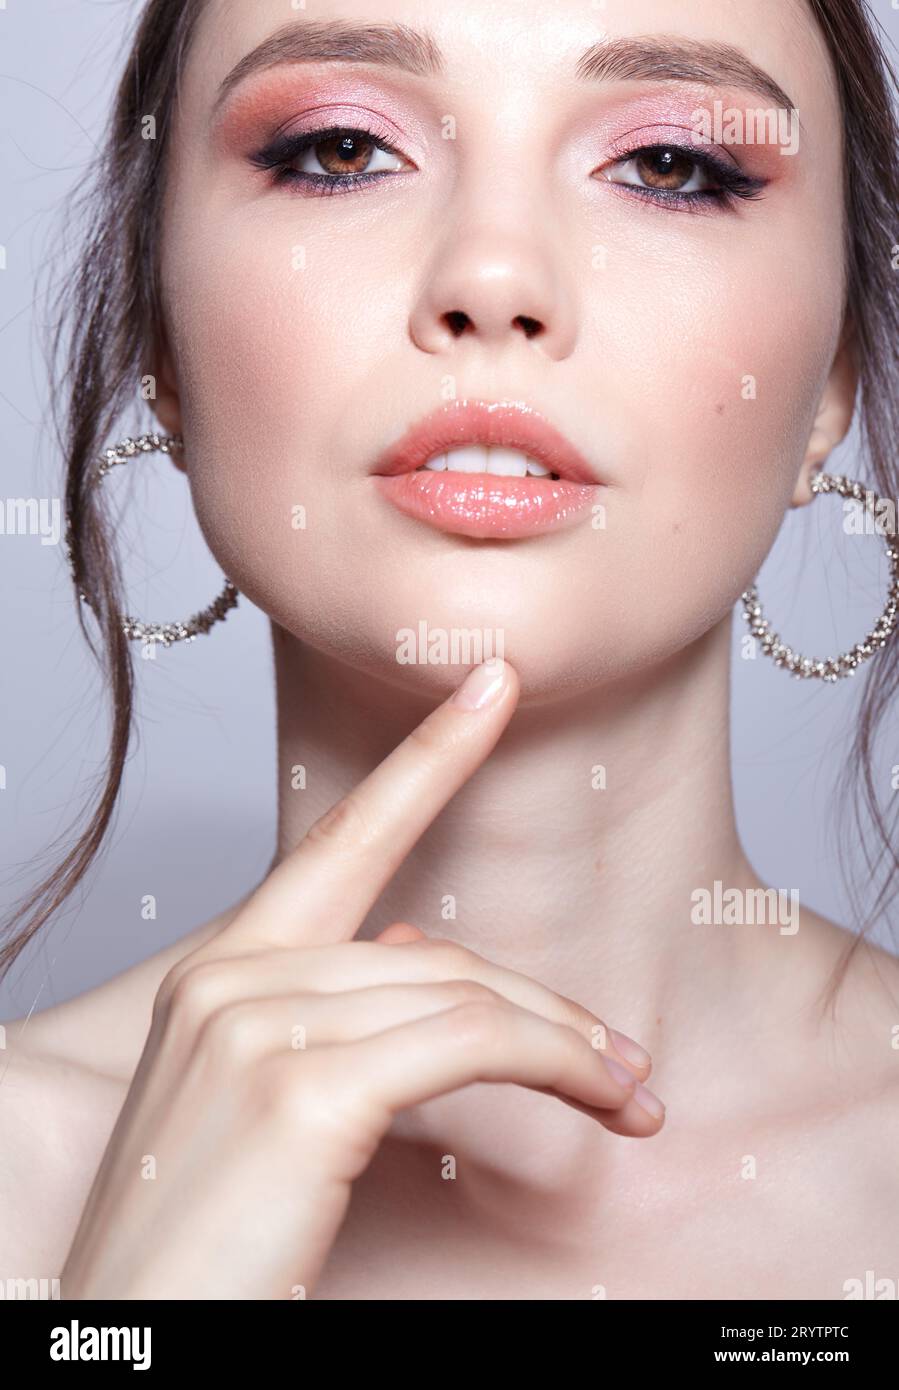 Closeup shot of human woman face. Female with face and eyes beauty makeup with pink smoky eyes eye shadows Stock Photo